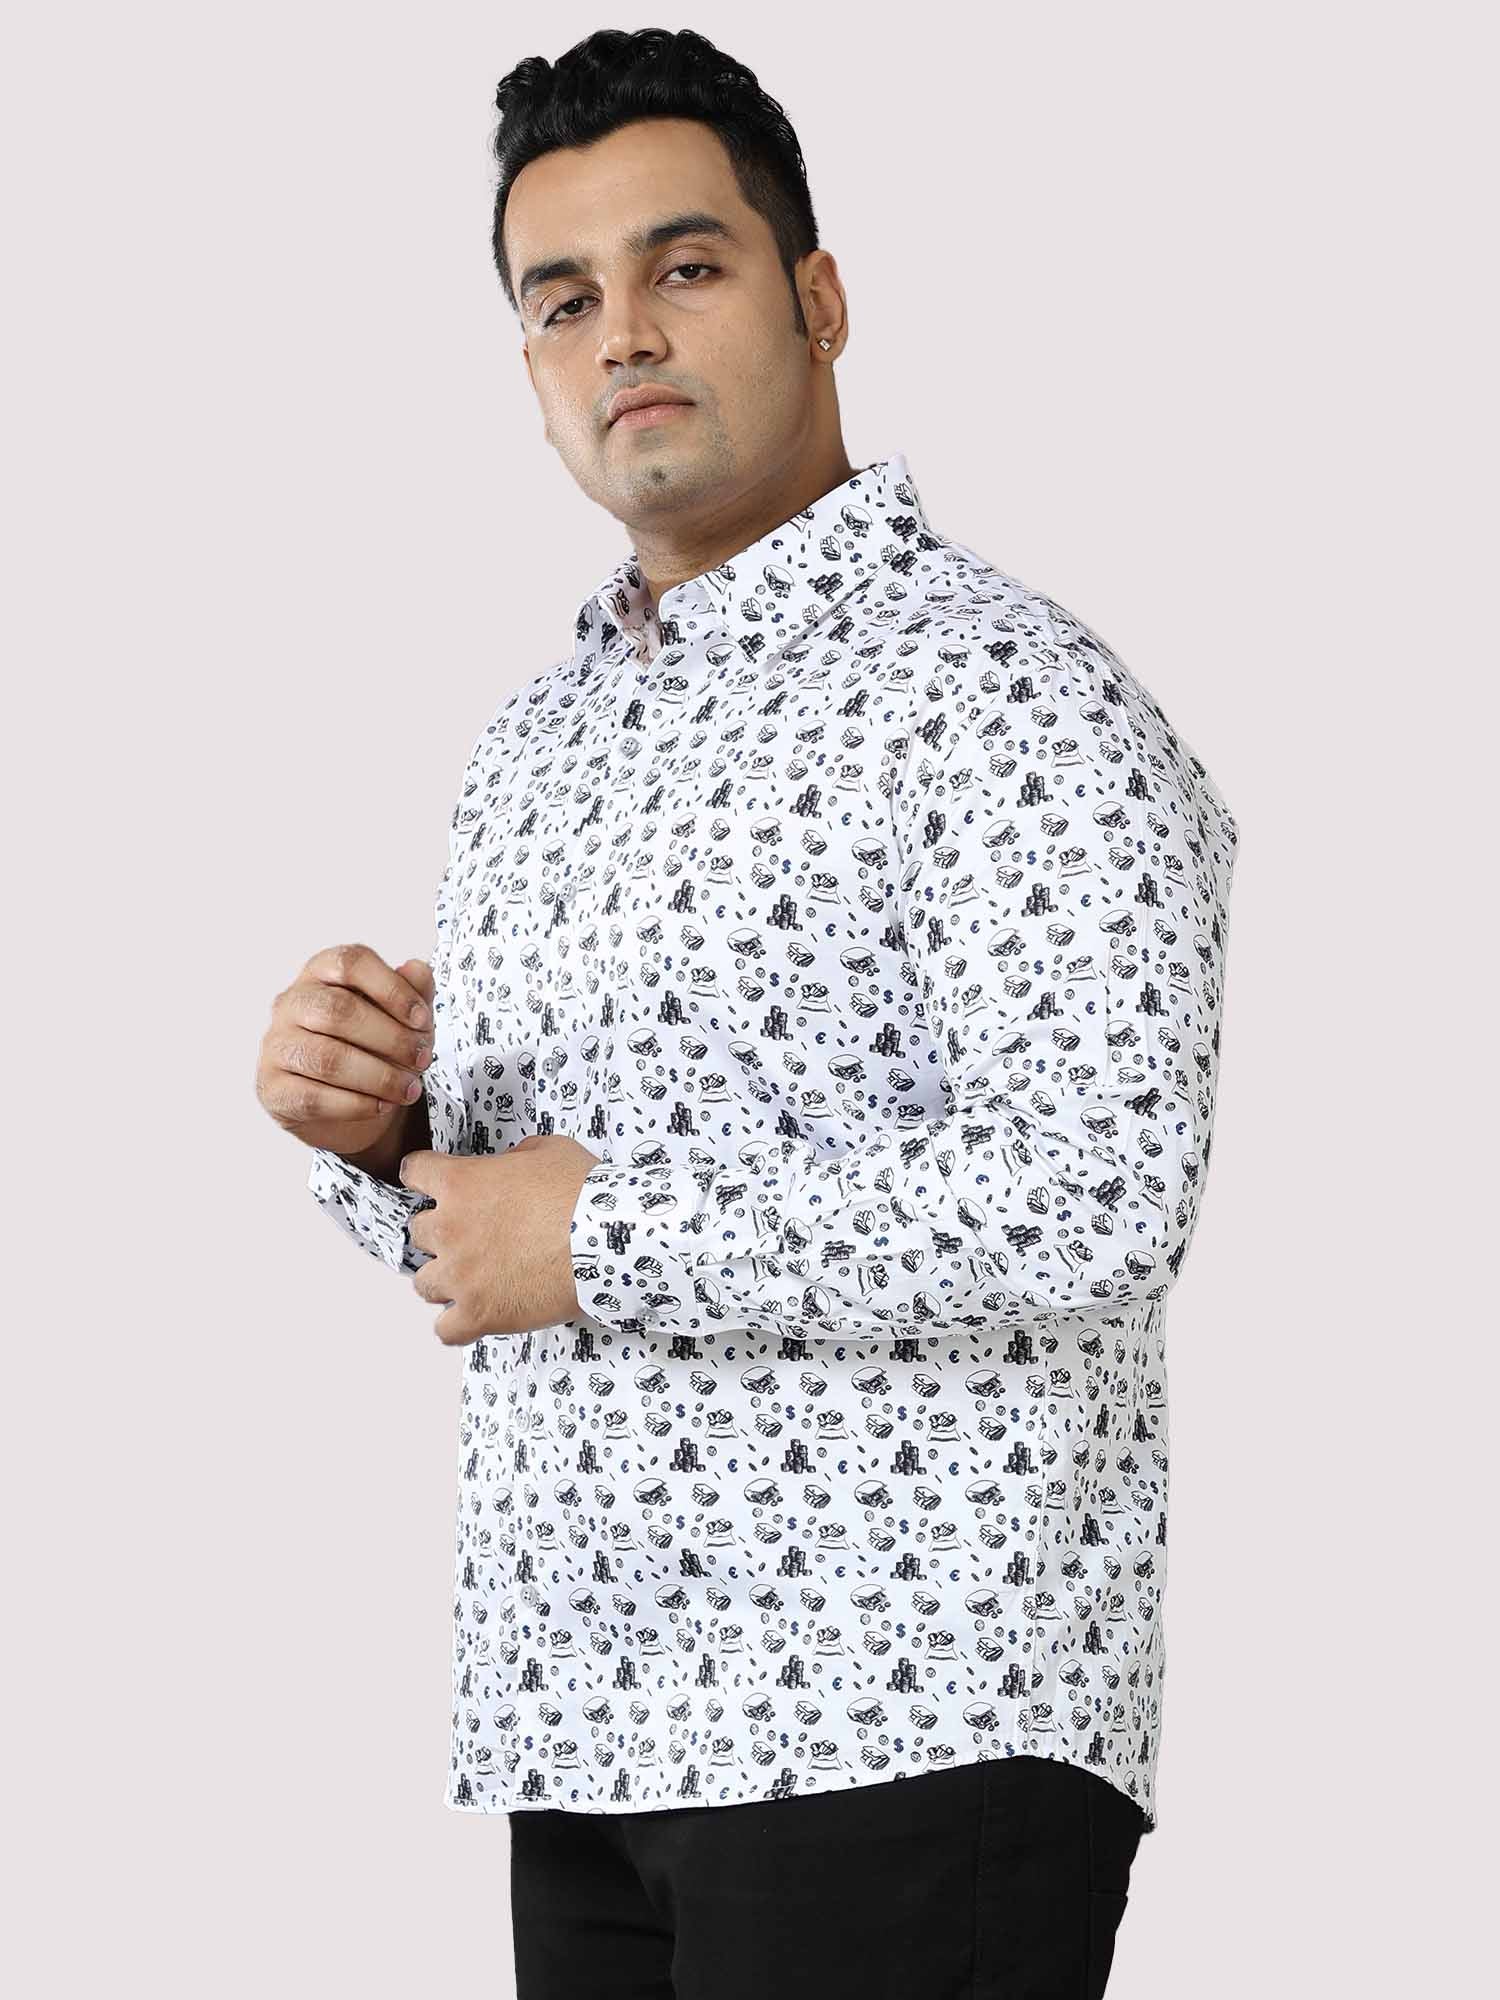 Currency Printed Cotton Full Shirt Men's Plus Size